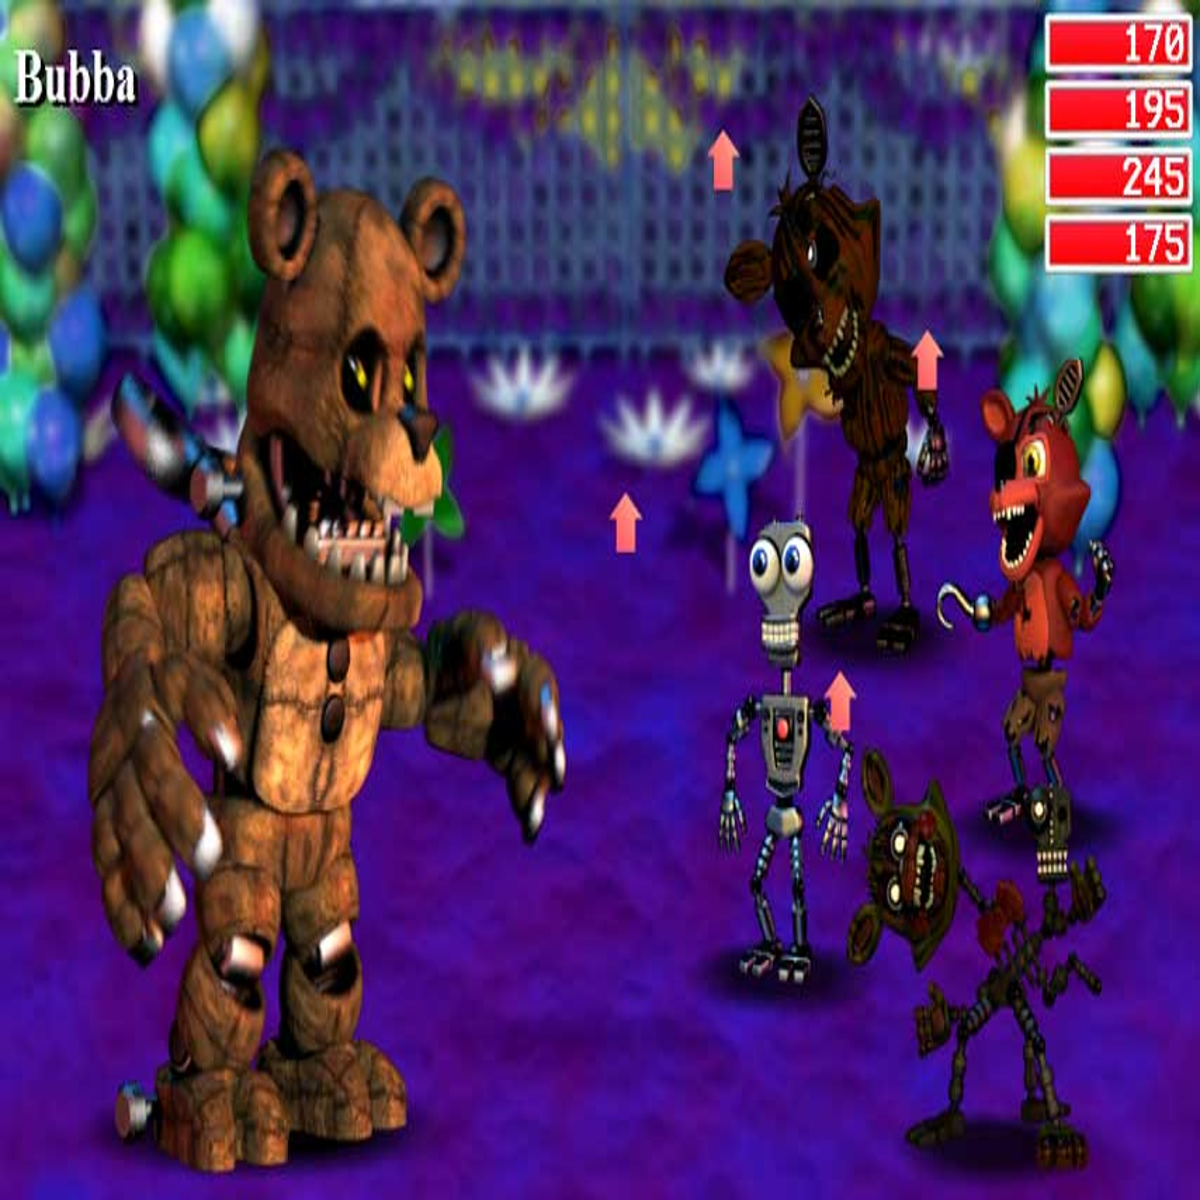 Five Nights at Freddy's World is back, and it's free